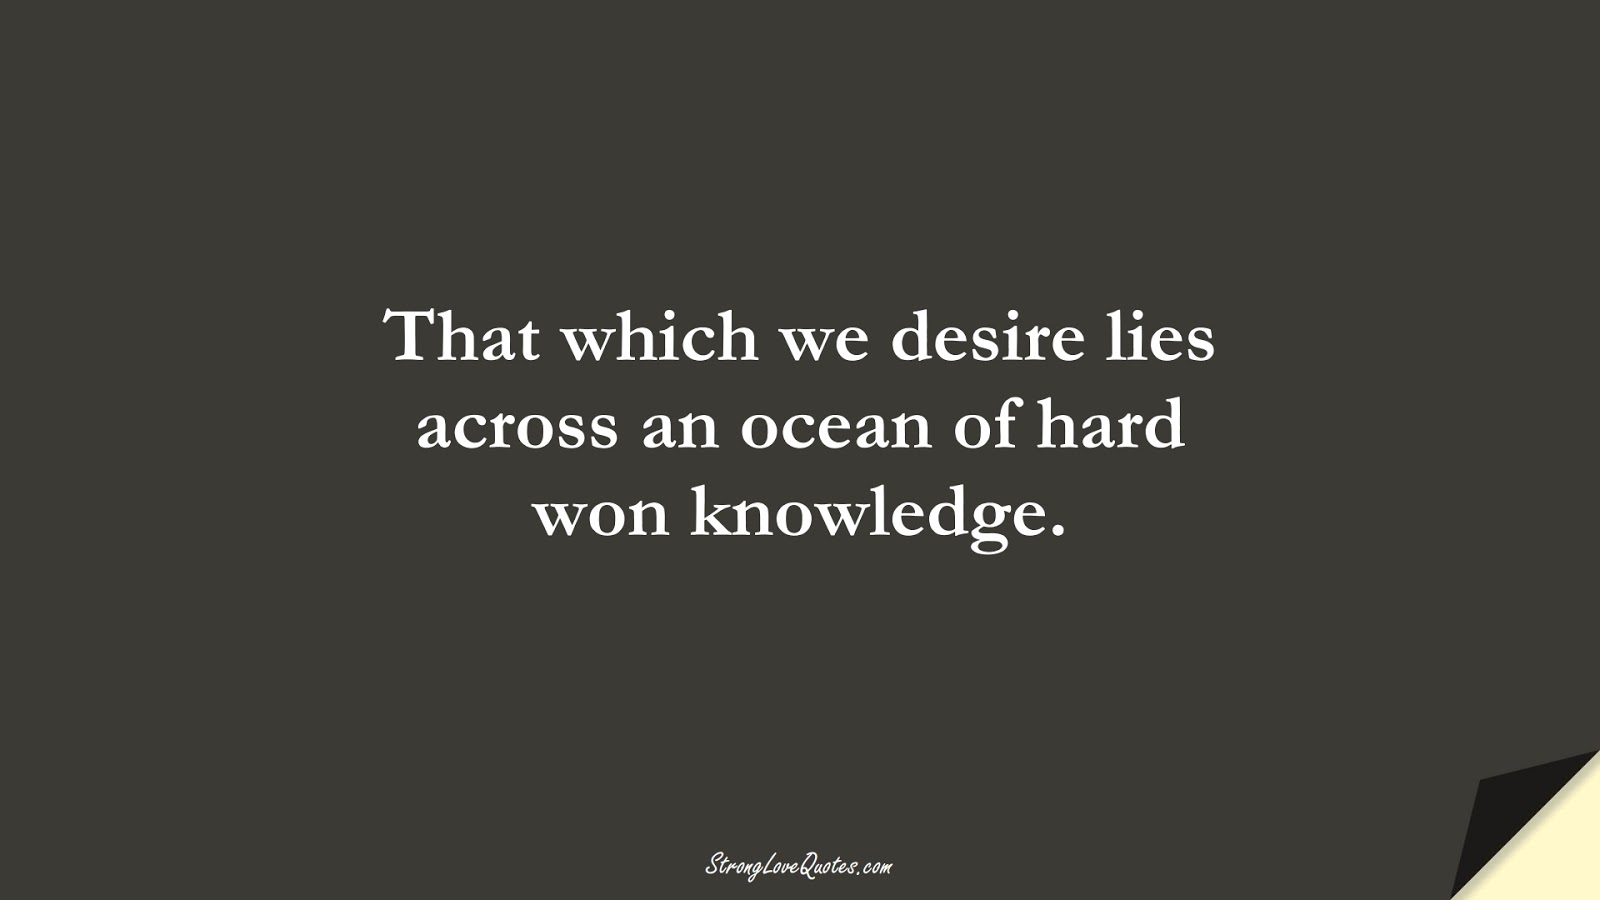 That which we desire lies across an ocean of hard won knowledge.FALSE